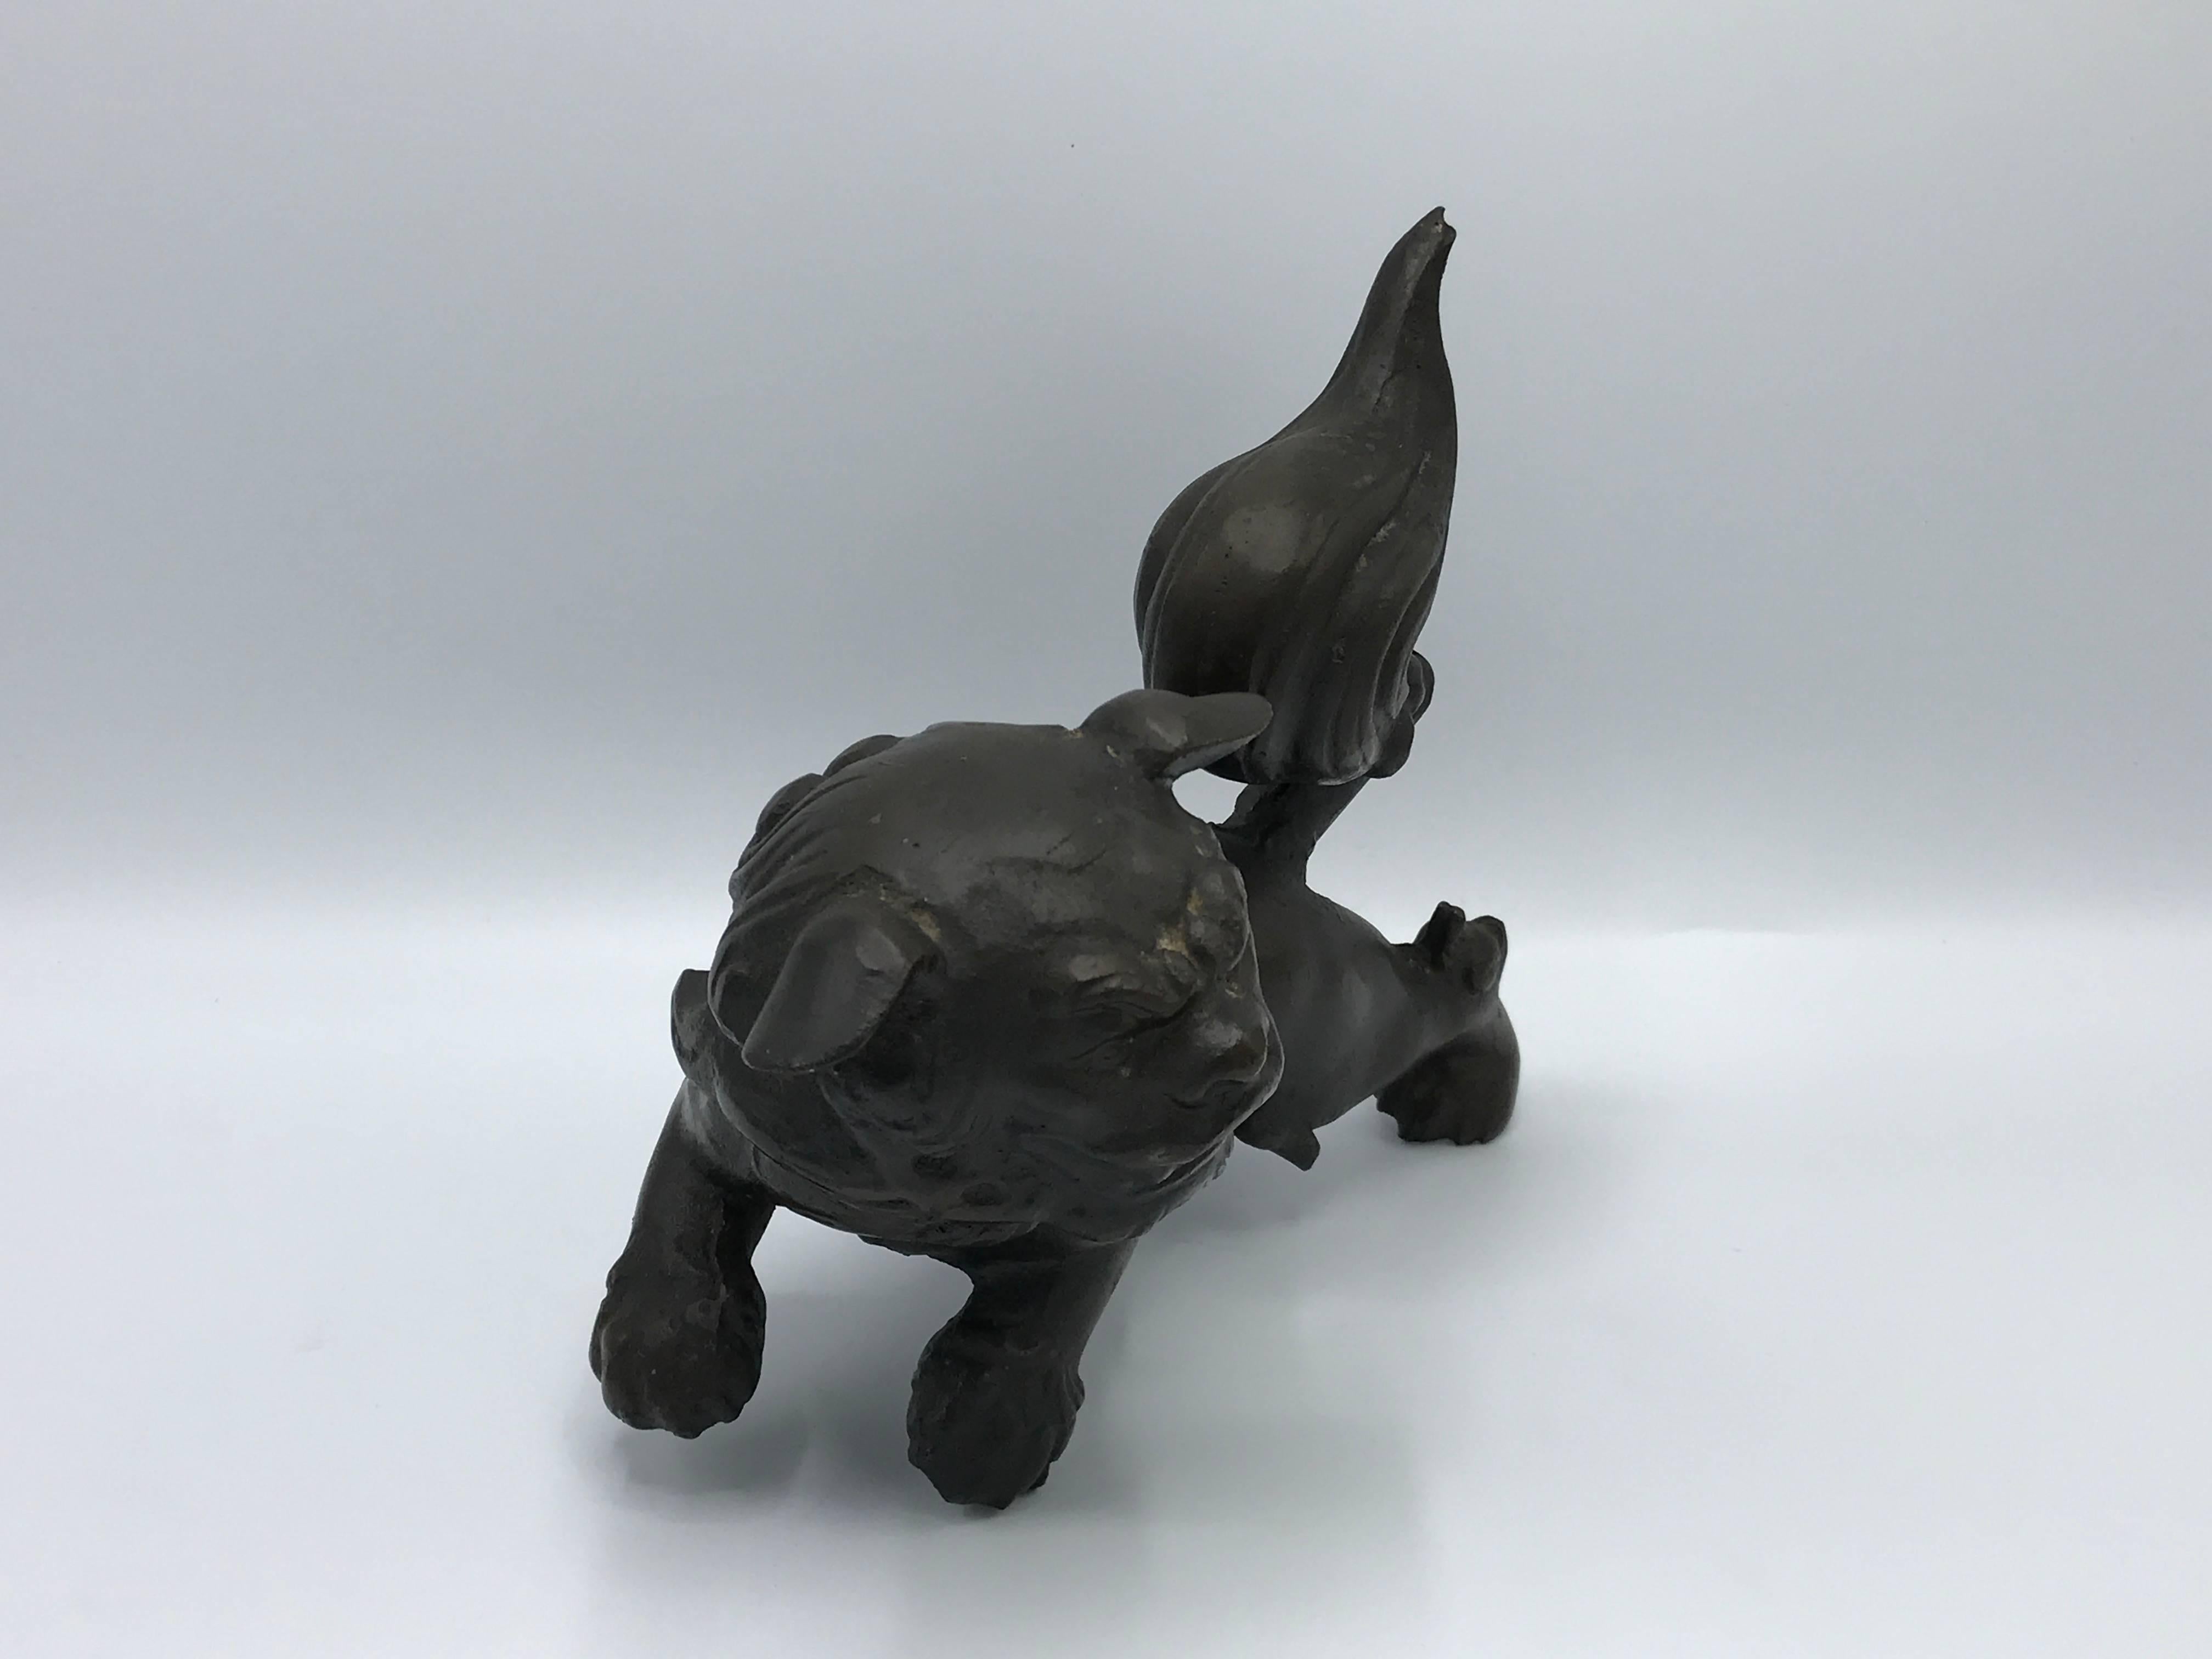 Offered is a stunning, 1920s solid-bronze foo dog statue.